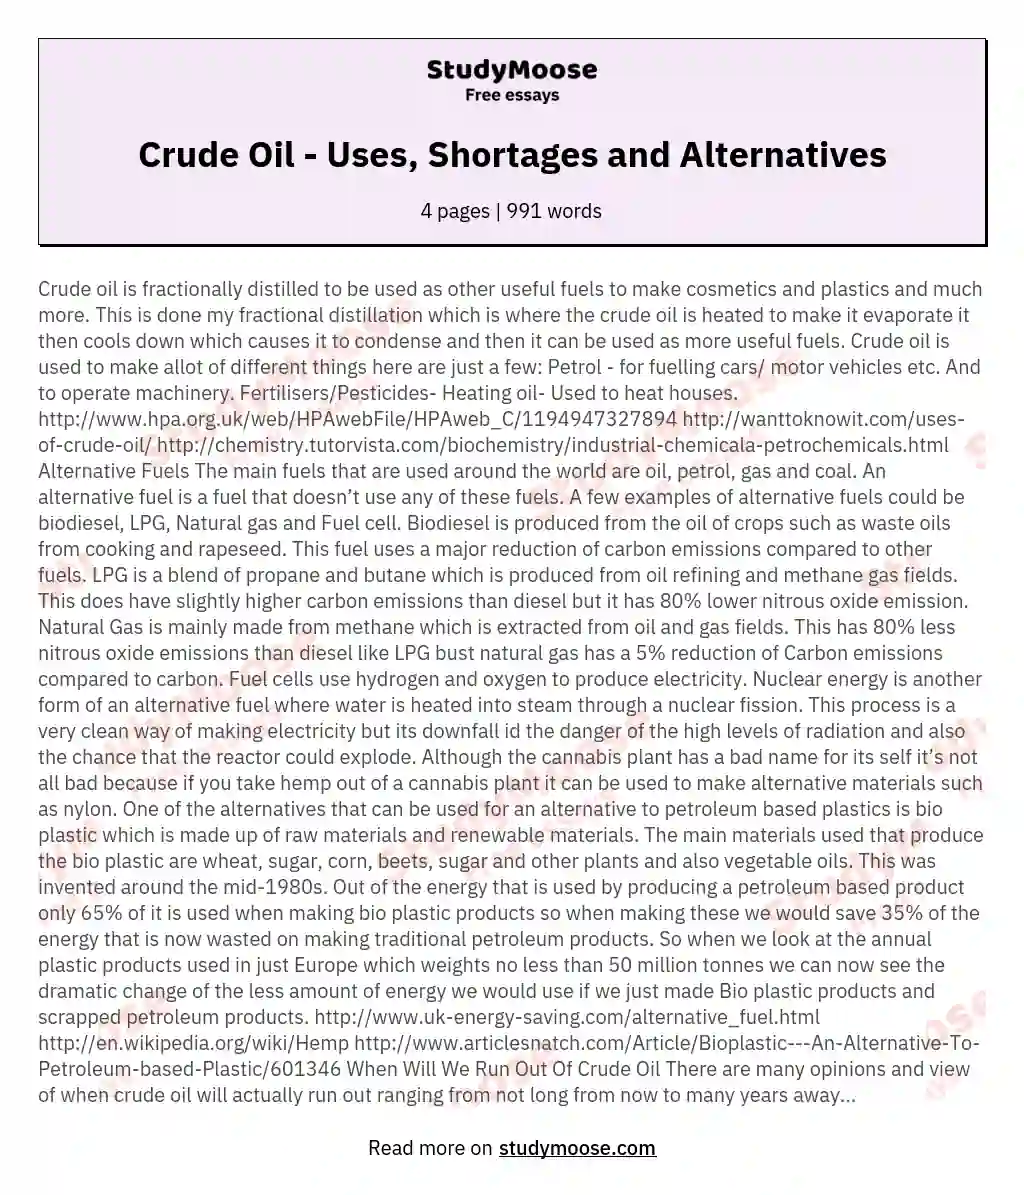 Crude Oil - Uses, Shortages and Alternatives essay